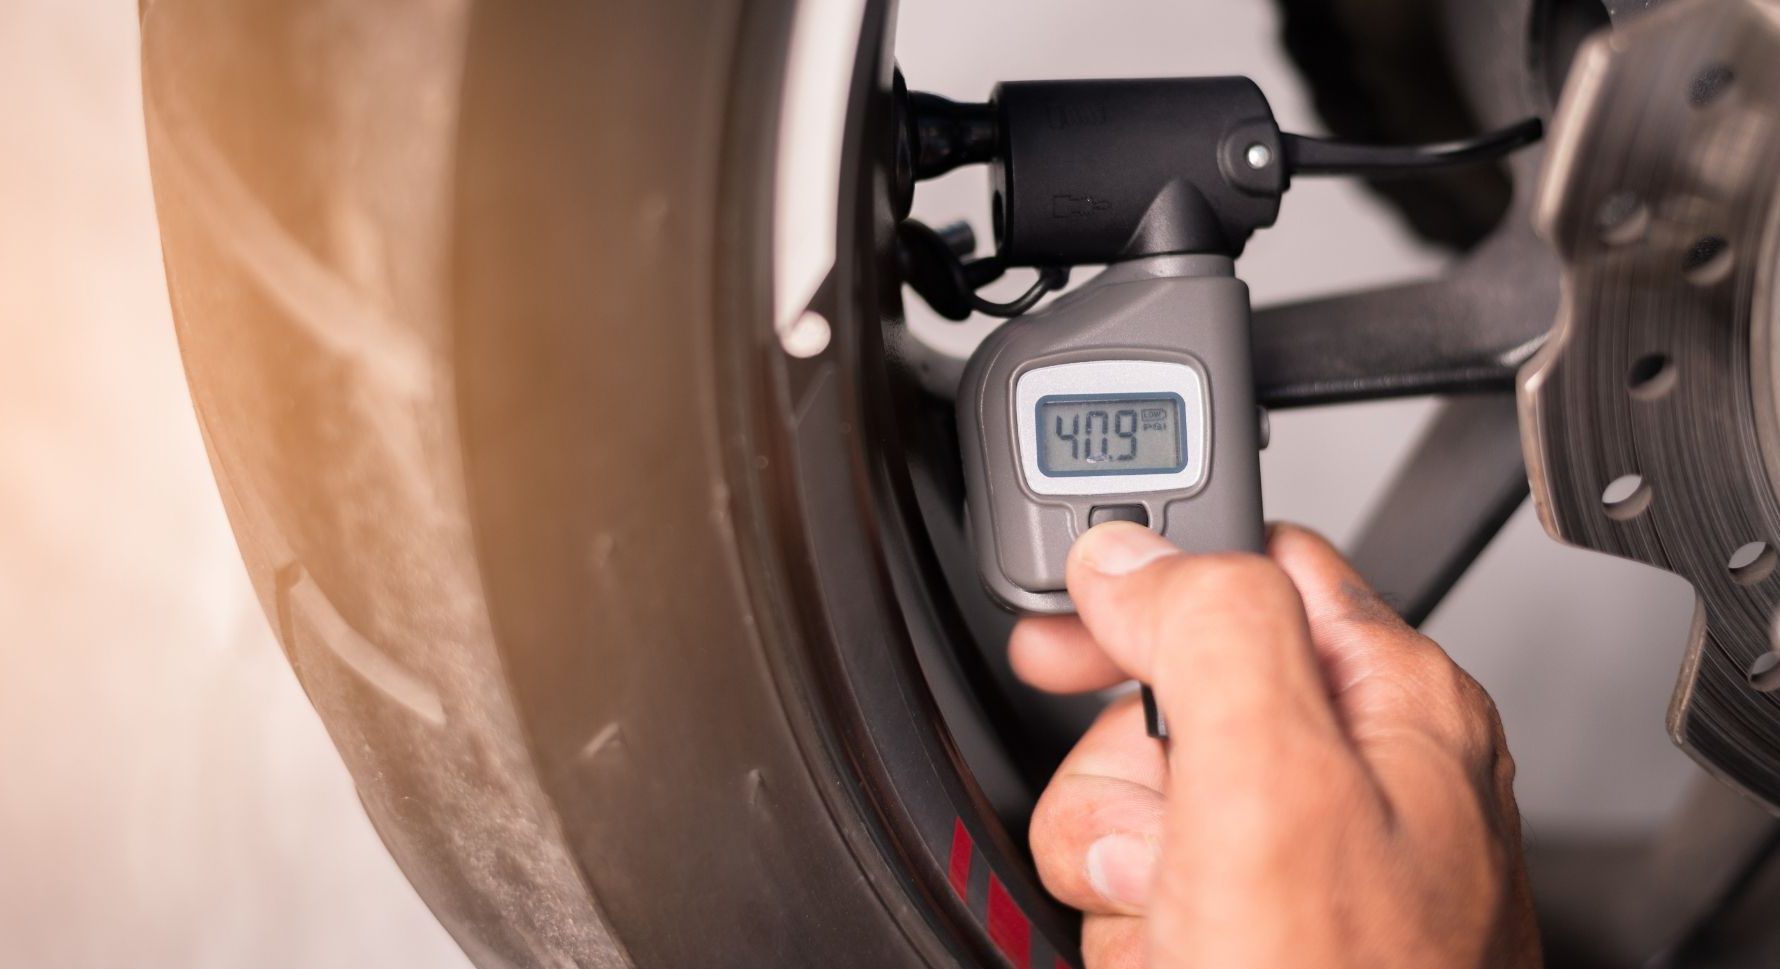 Global Automotive Tire Pressure Monitoring System Market Overview And Prospects – Includes Automotive Tire Pressure Monitoring System Market Growth